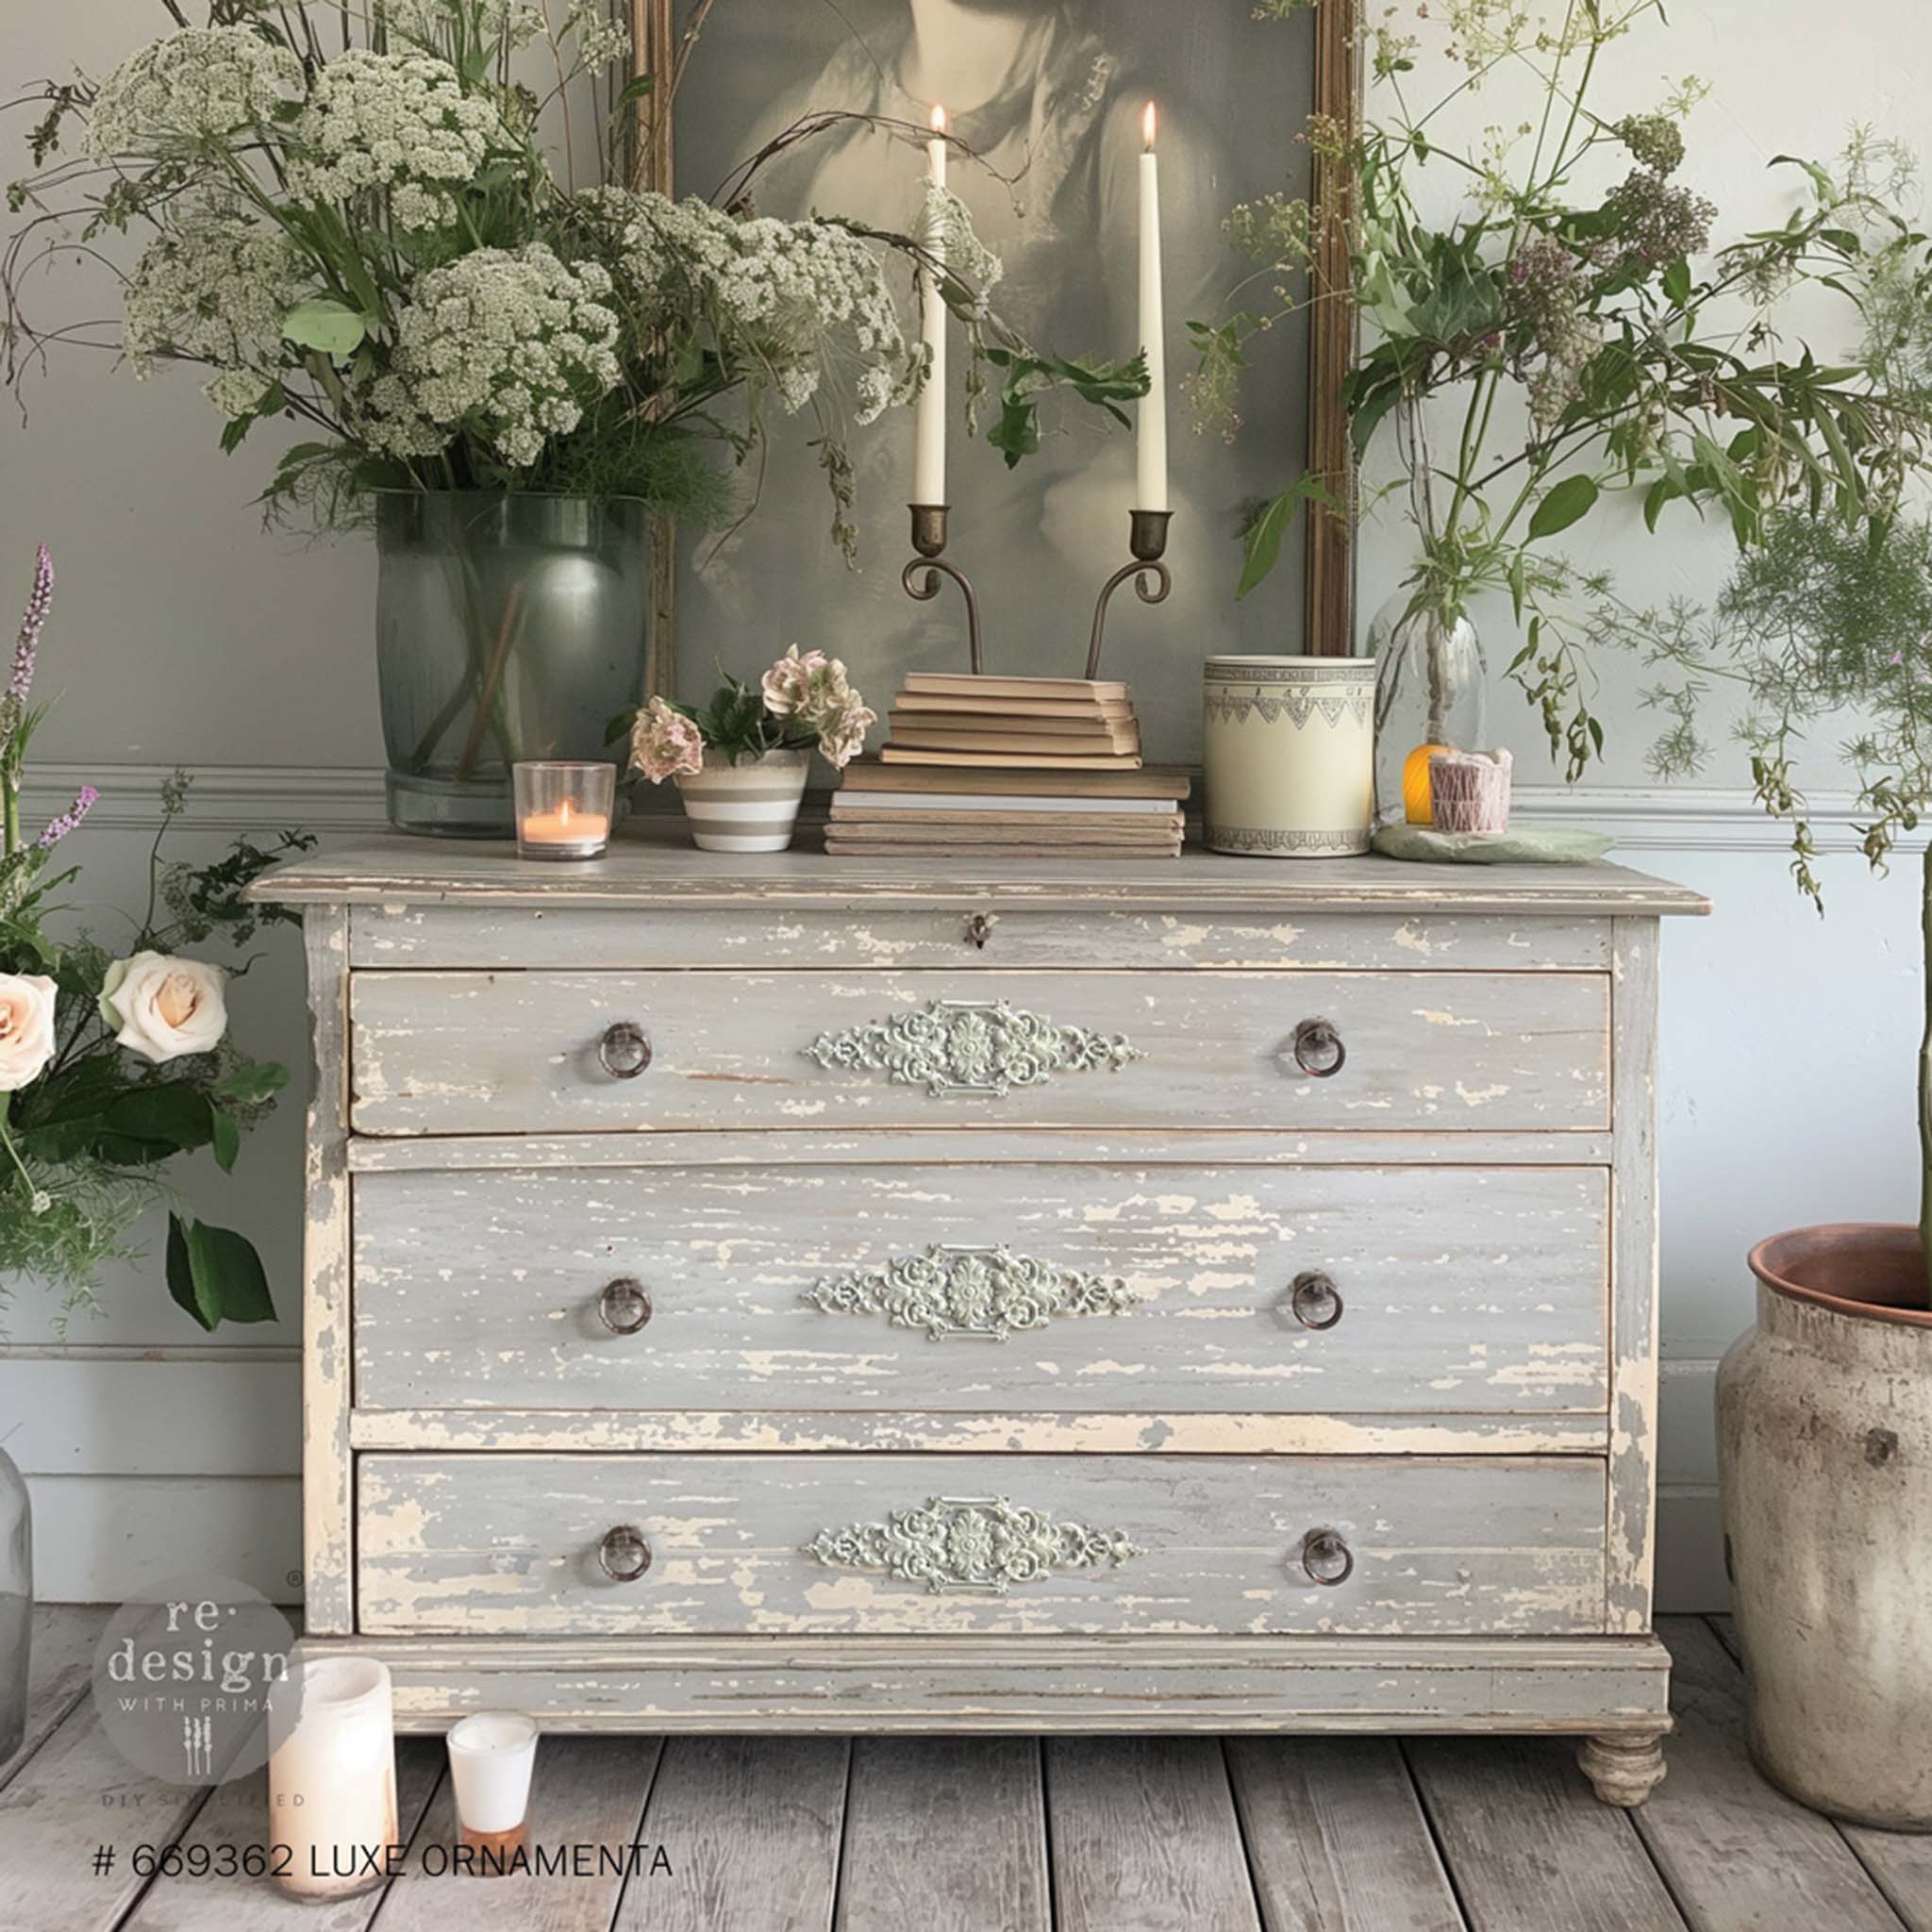 A vintage 3-drawer dresser is painted a weathered light gray and features ReDesign with Prima's Luxe Ornamenta Decor Poly Casting in the center of each drawer.